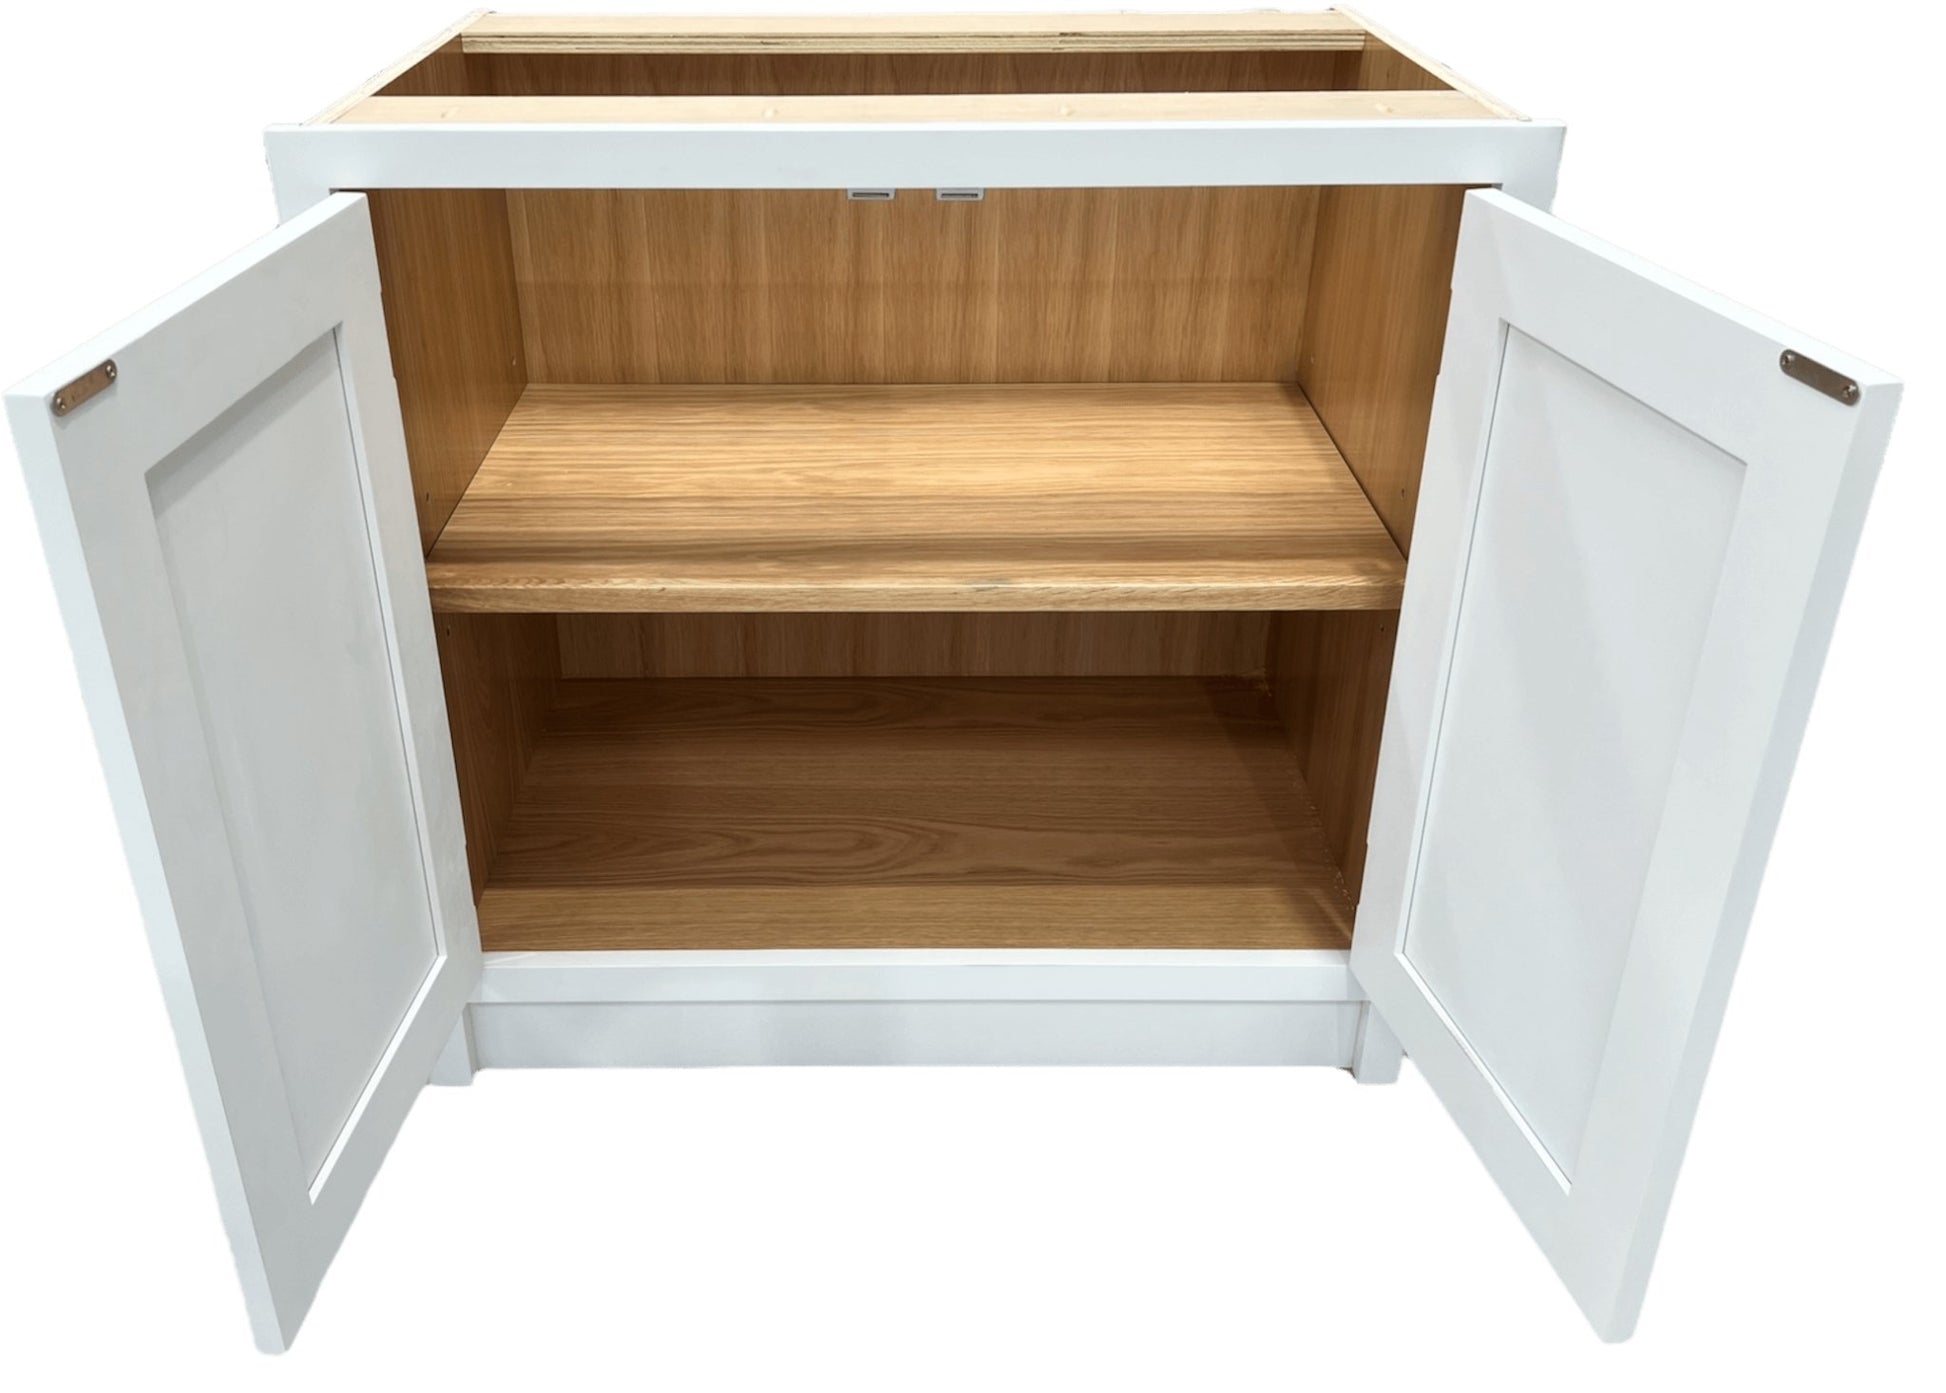 BH 800 - 800mm Highline double door base unit - Classic Kitchens Direct